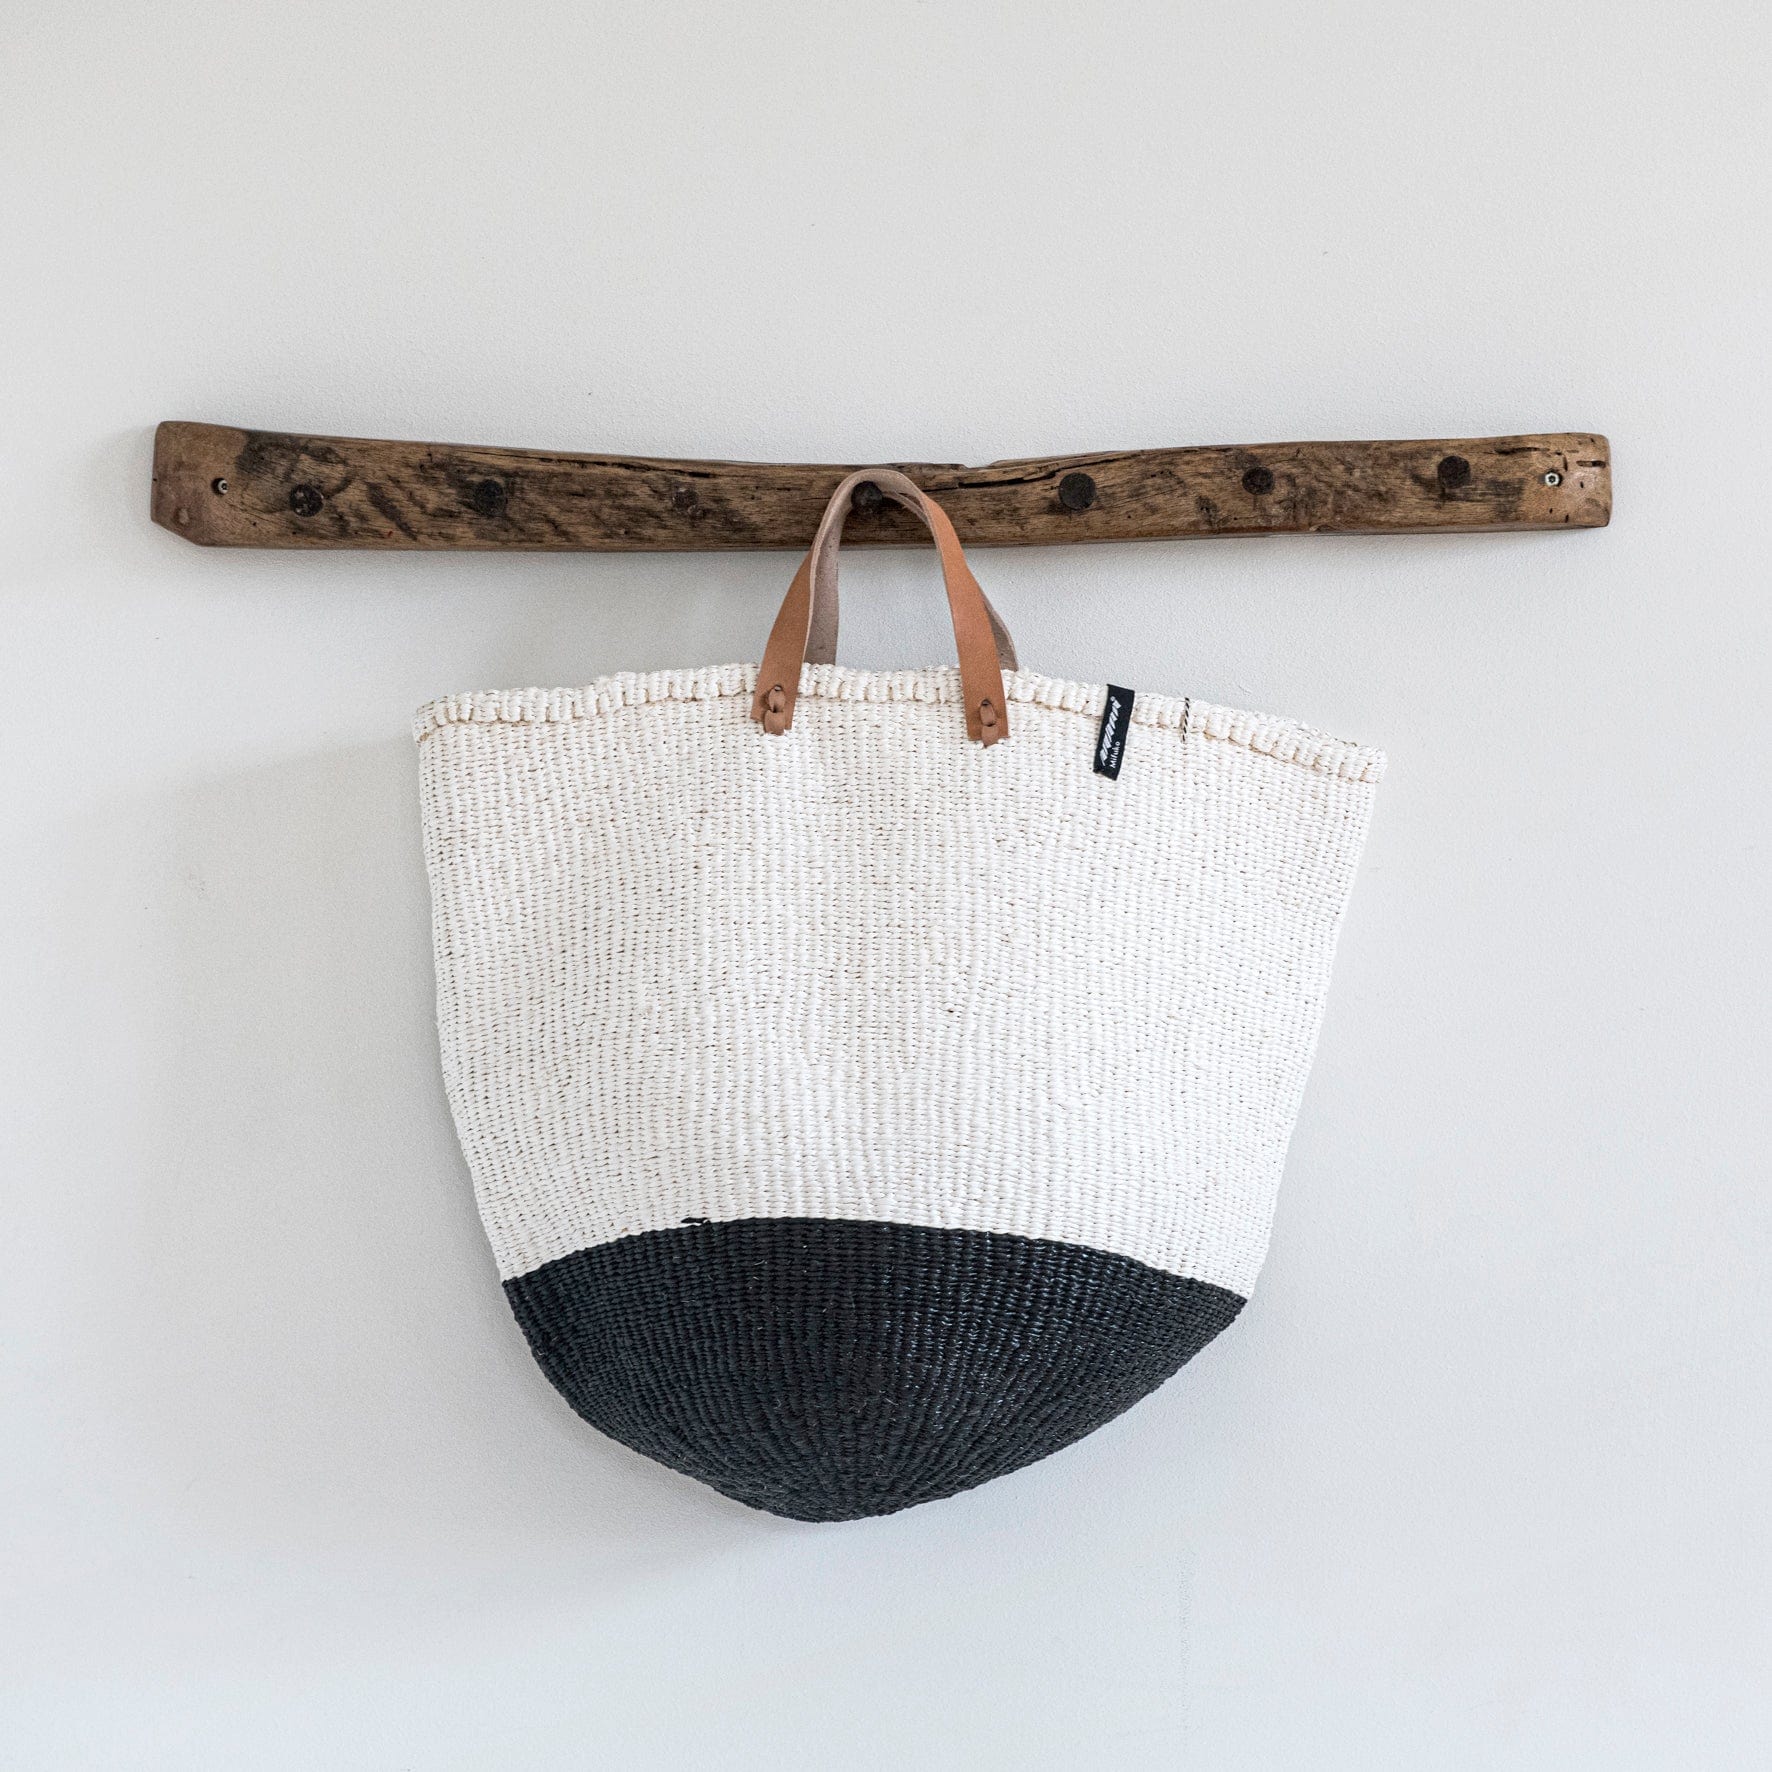 Mifuko Partly recycled plastic and sisal Market basket L Kiondo market basket | Black and white duo L